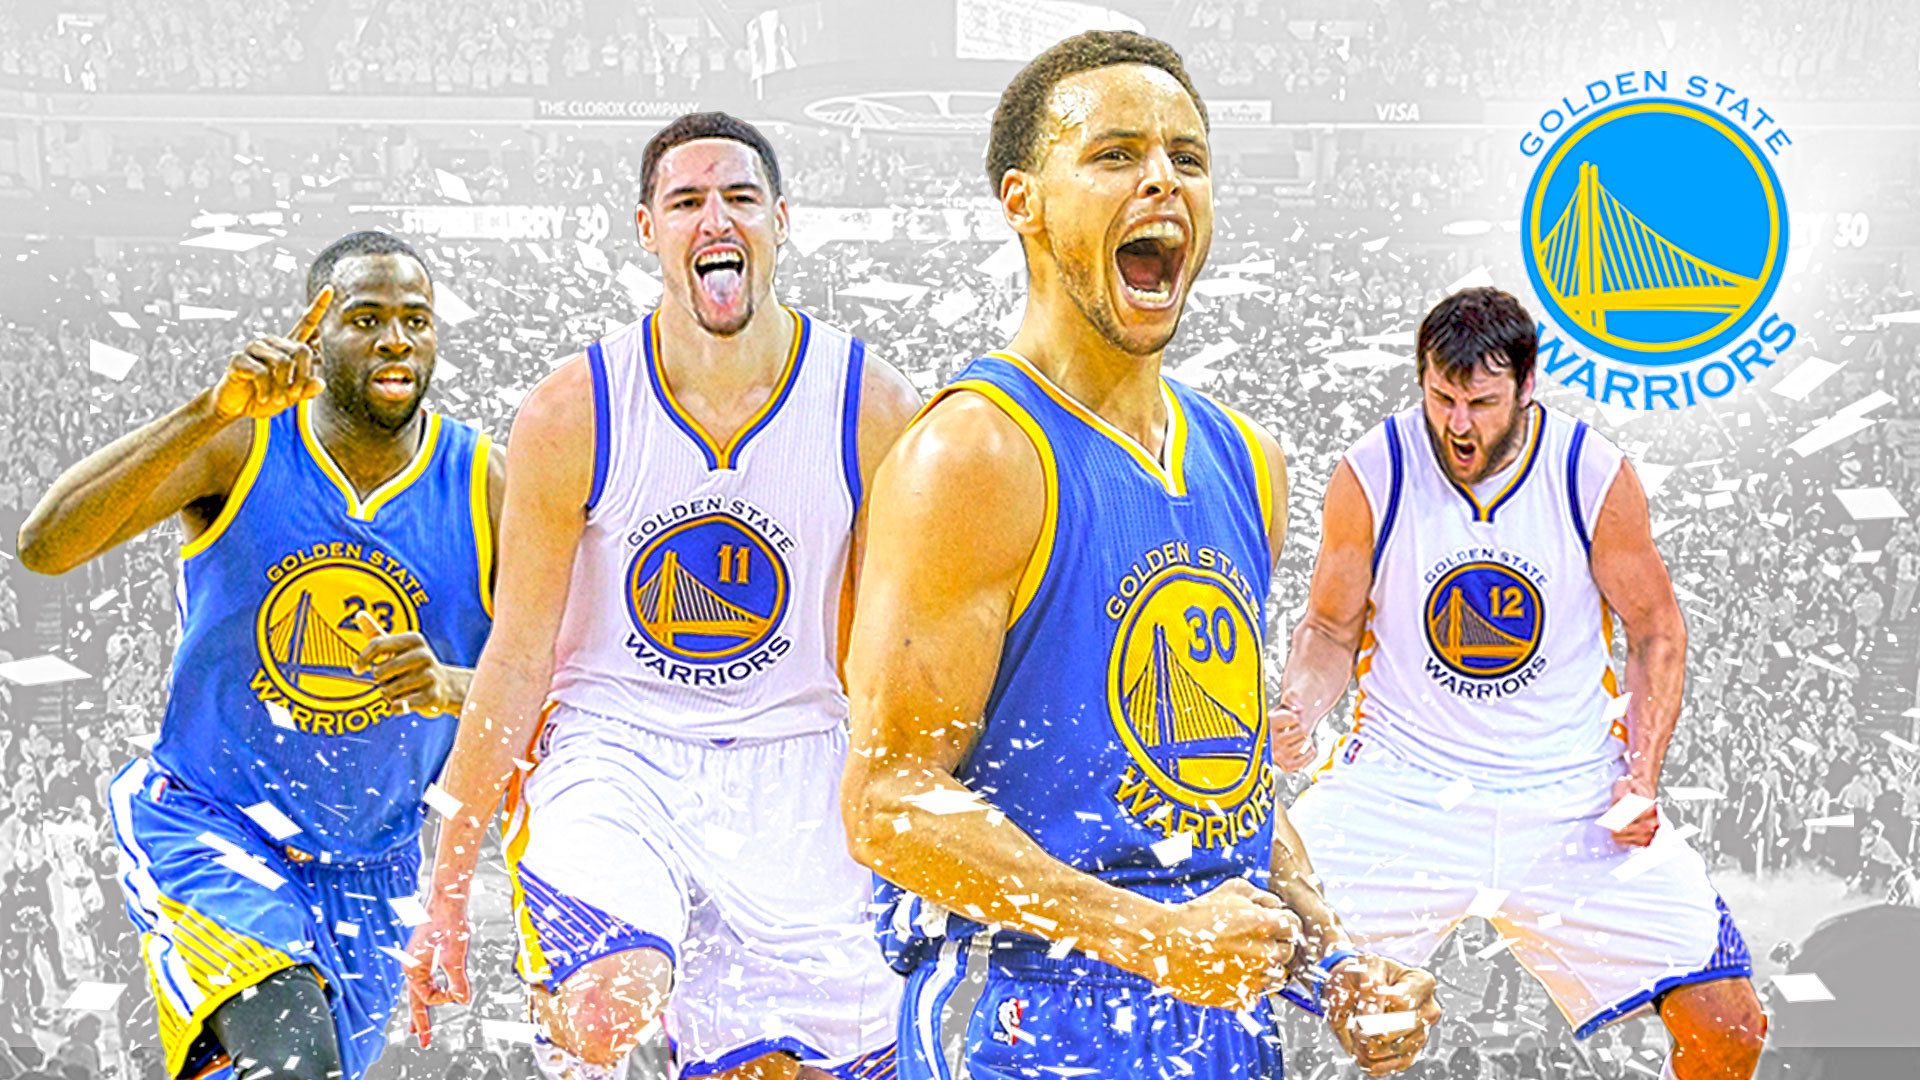 1920x1080 Image Gallery of Klay Thompson And Stephen Curry Wallpaper